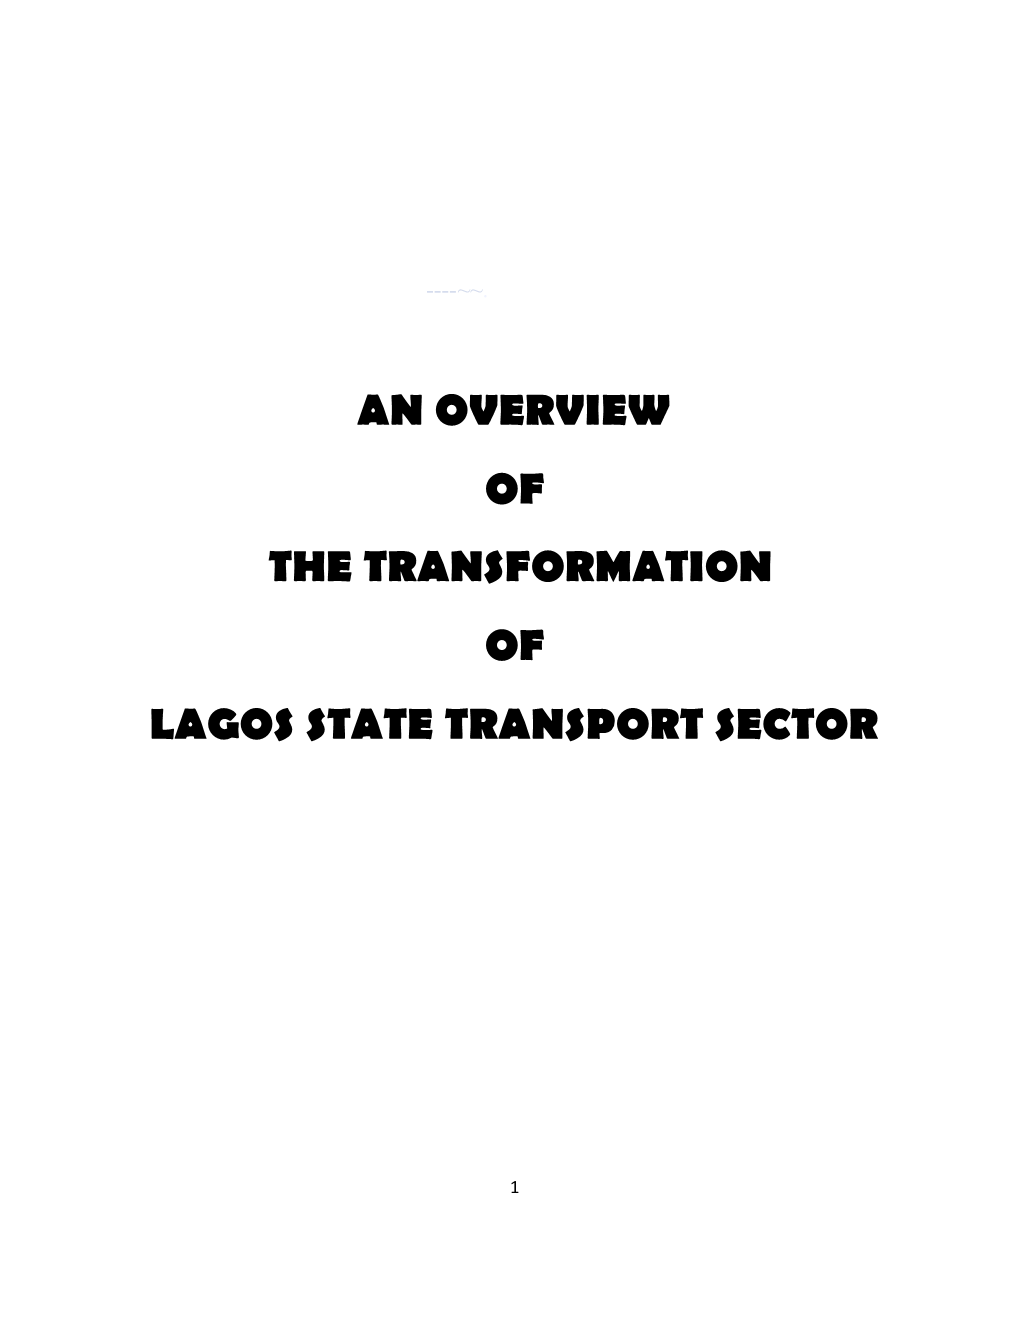 An Overview of the Transformation of Lagos State Transport Sector